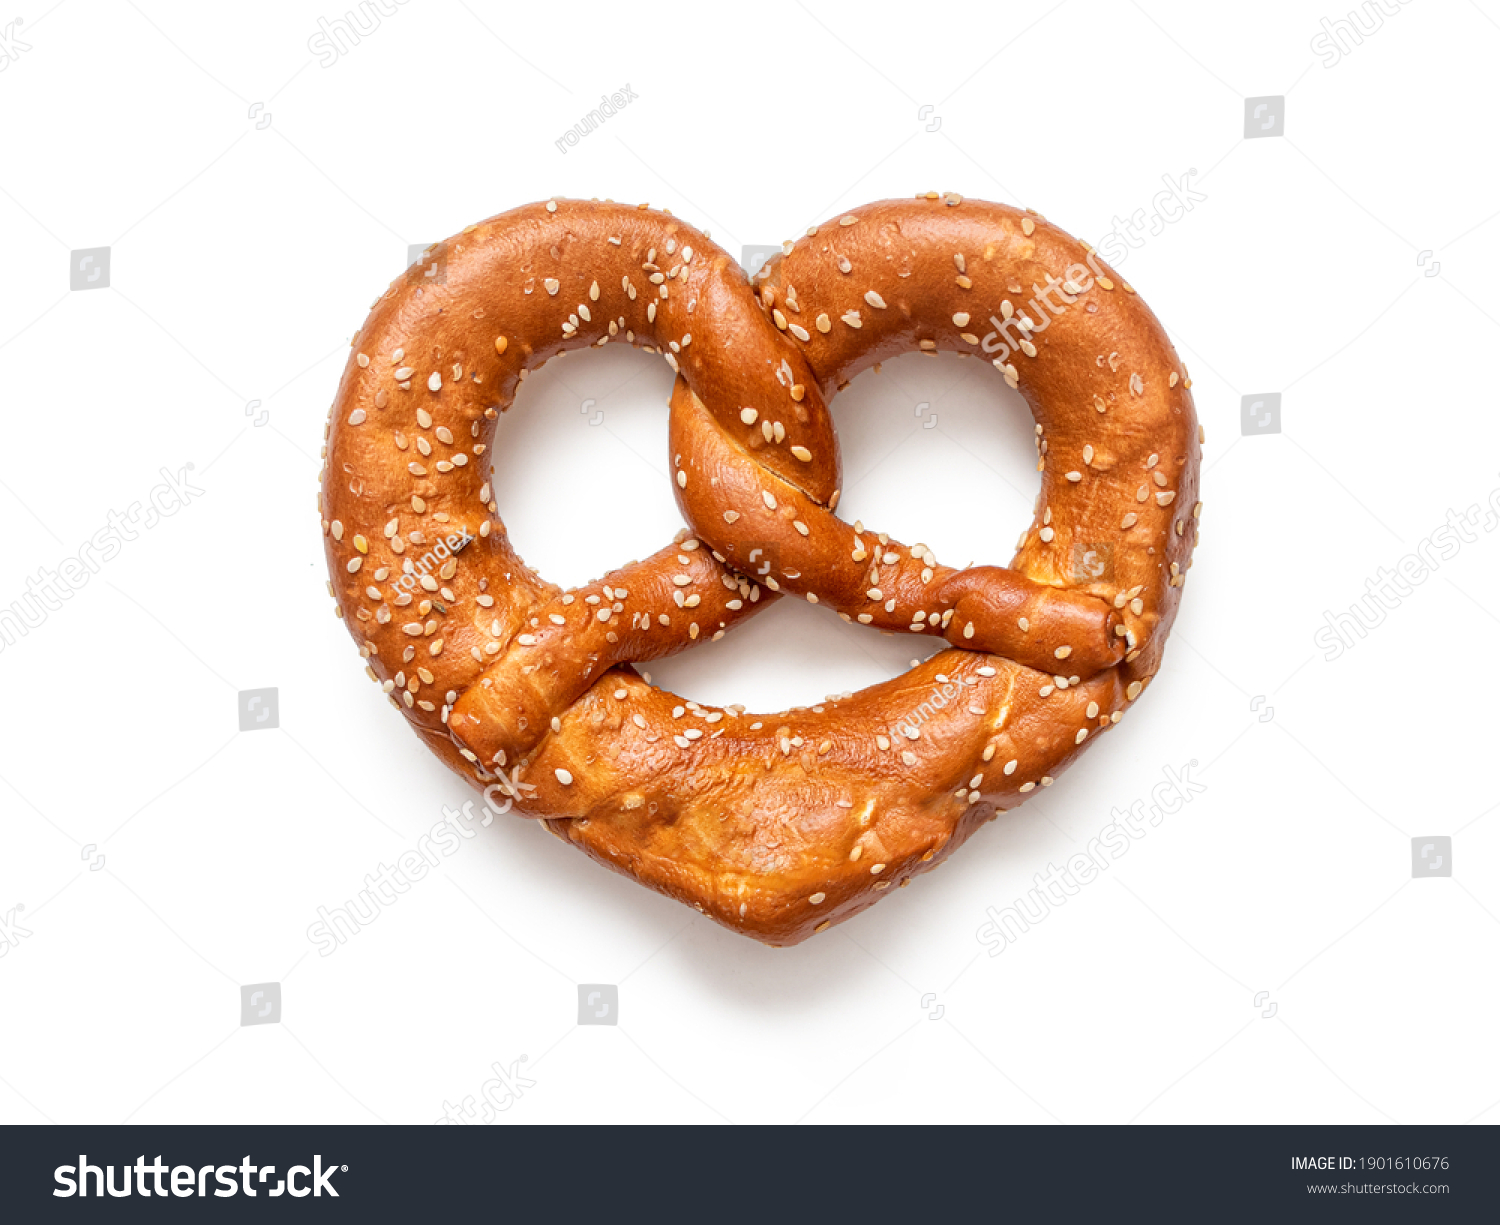 Brezel - a pretzel sprinkled with sesame seeds, in the form of "crossed arms", widely distributed in southern Germany, isolated on a white background #1901610676